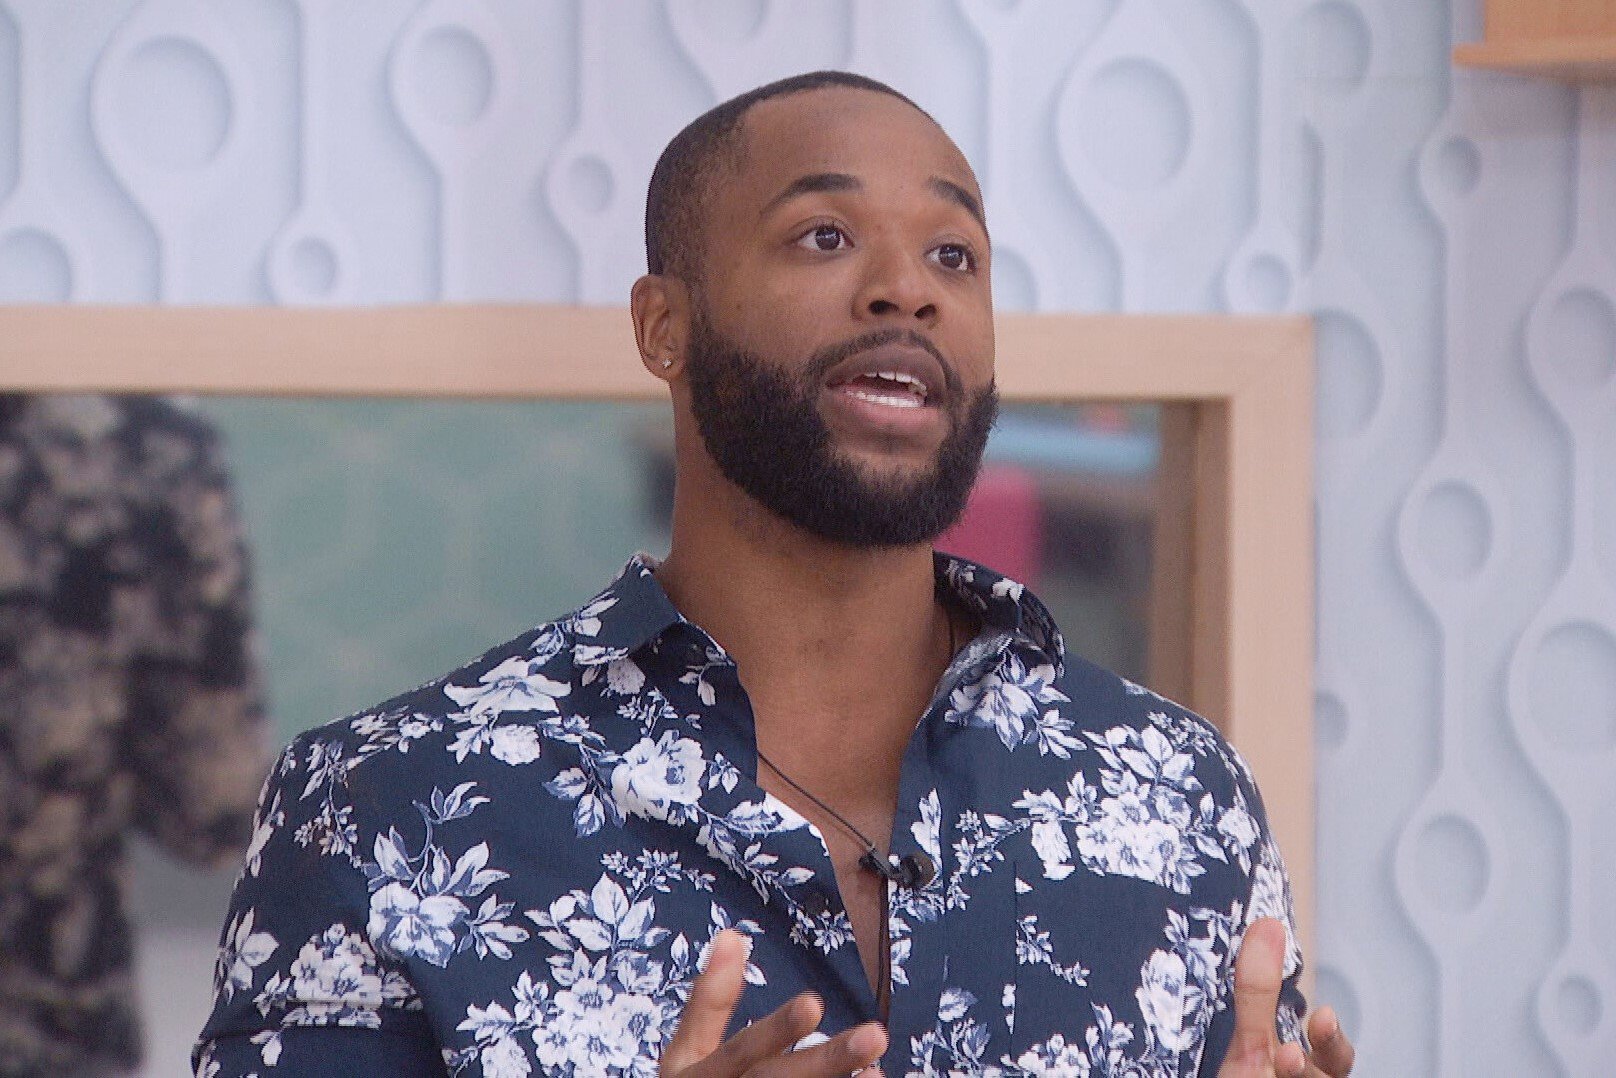 Monte Taylor, who was the runner-up of 'Big Brother 24' on CBS, wears a dark blue floral button-up shirt.